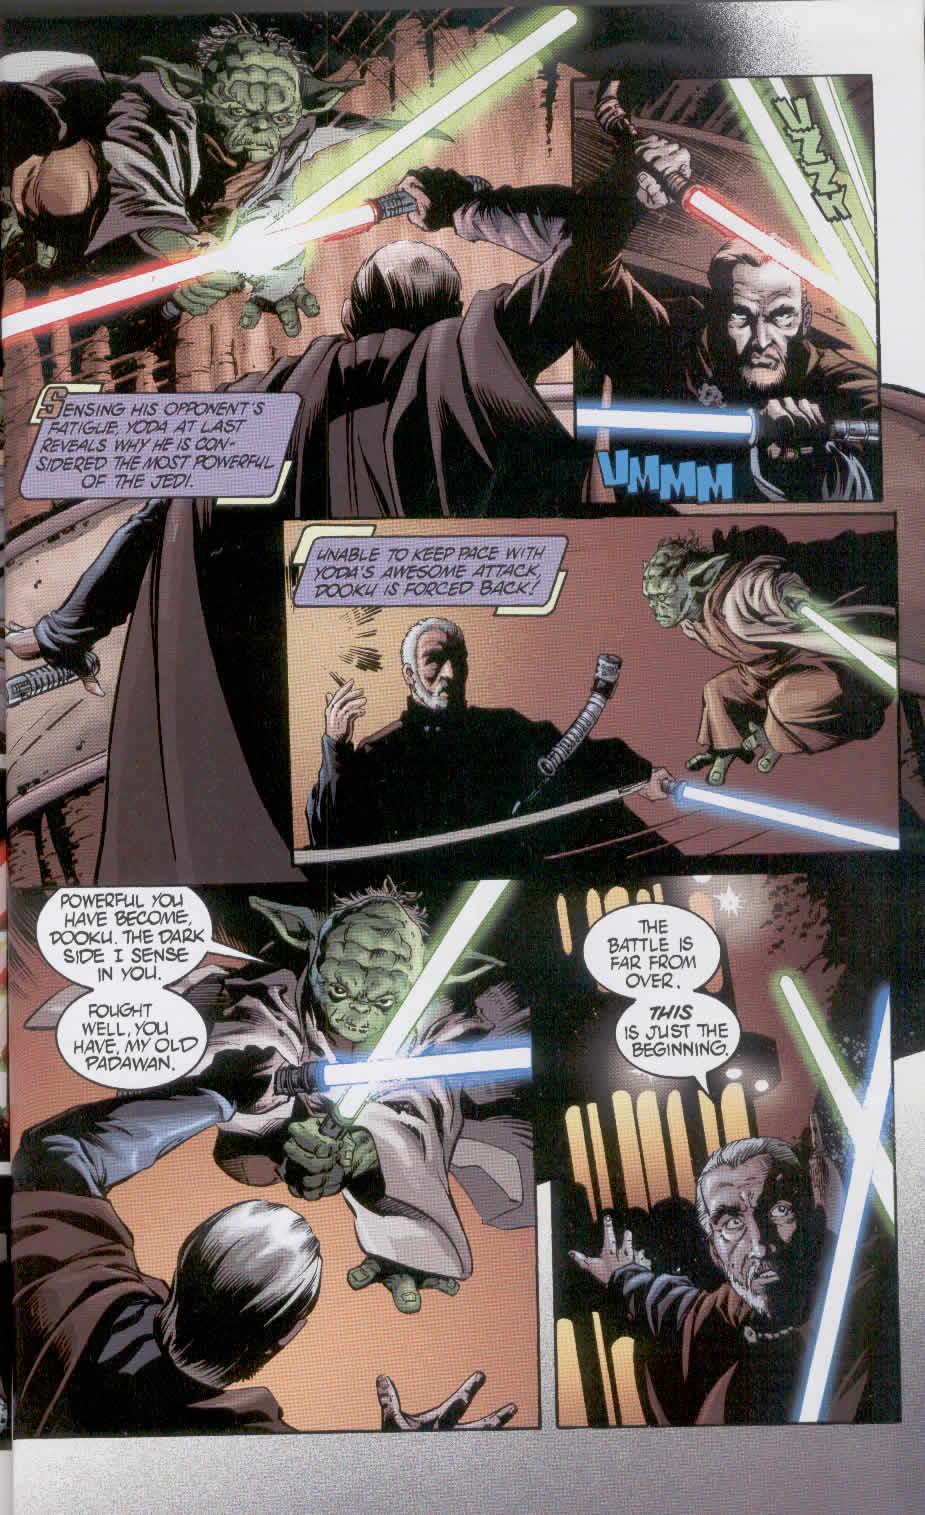 Yoda vs Dooku from the Attack of the Clones comic